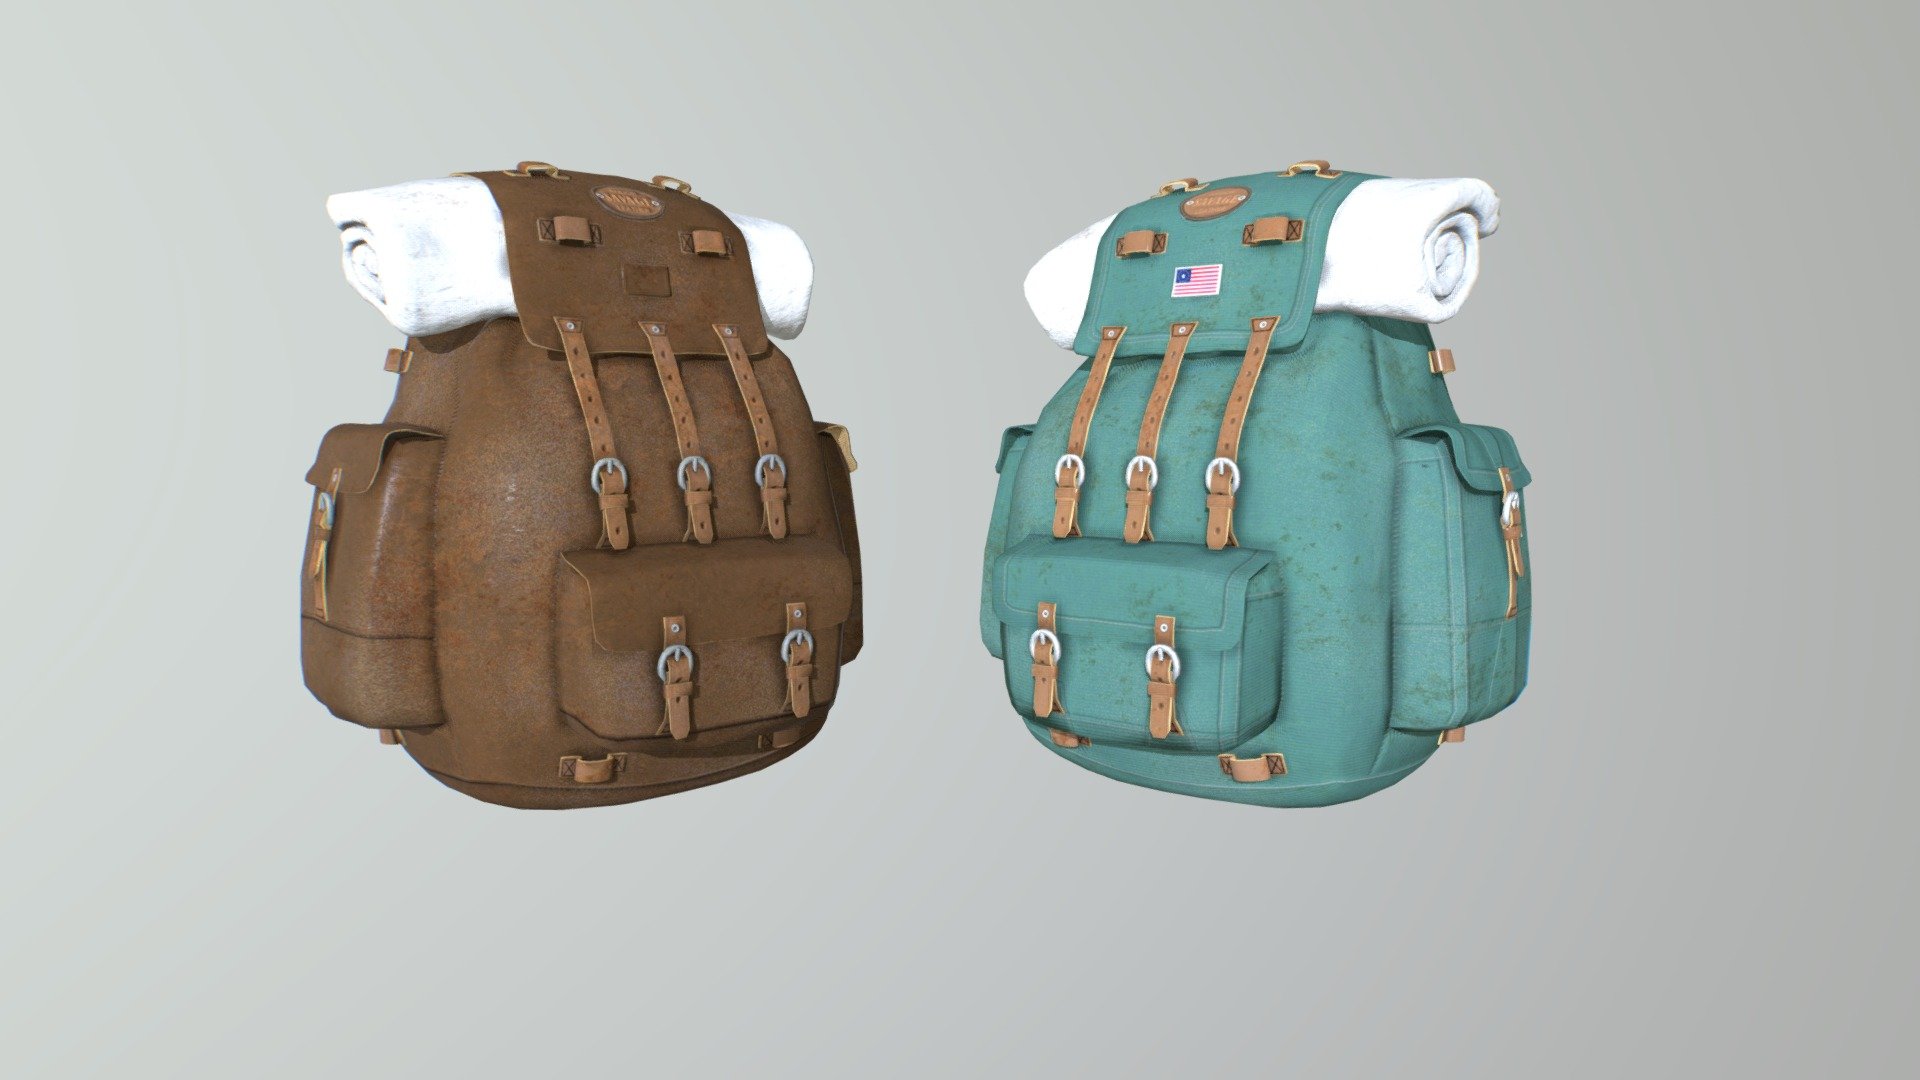 For my mod Adventurers Backpack
http://reptilecavemods.blogspot.com/2018/11/adventurers-backpack.html - Army BackPack - 3D model by Raptor (@reptileye) 3d model